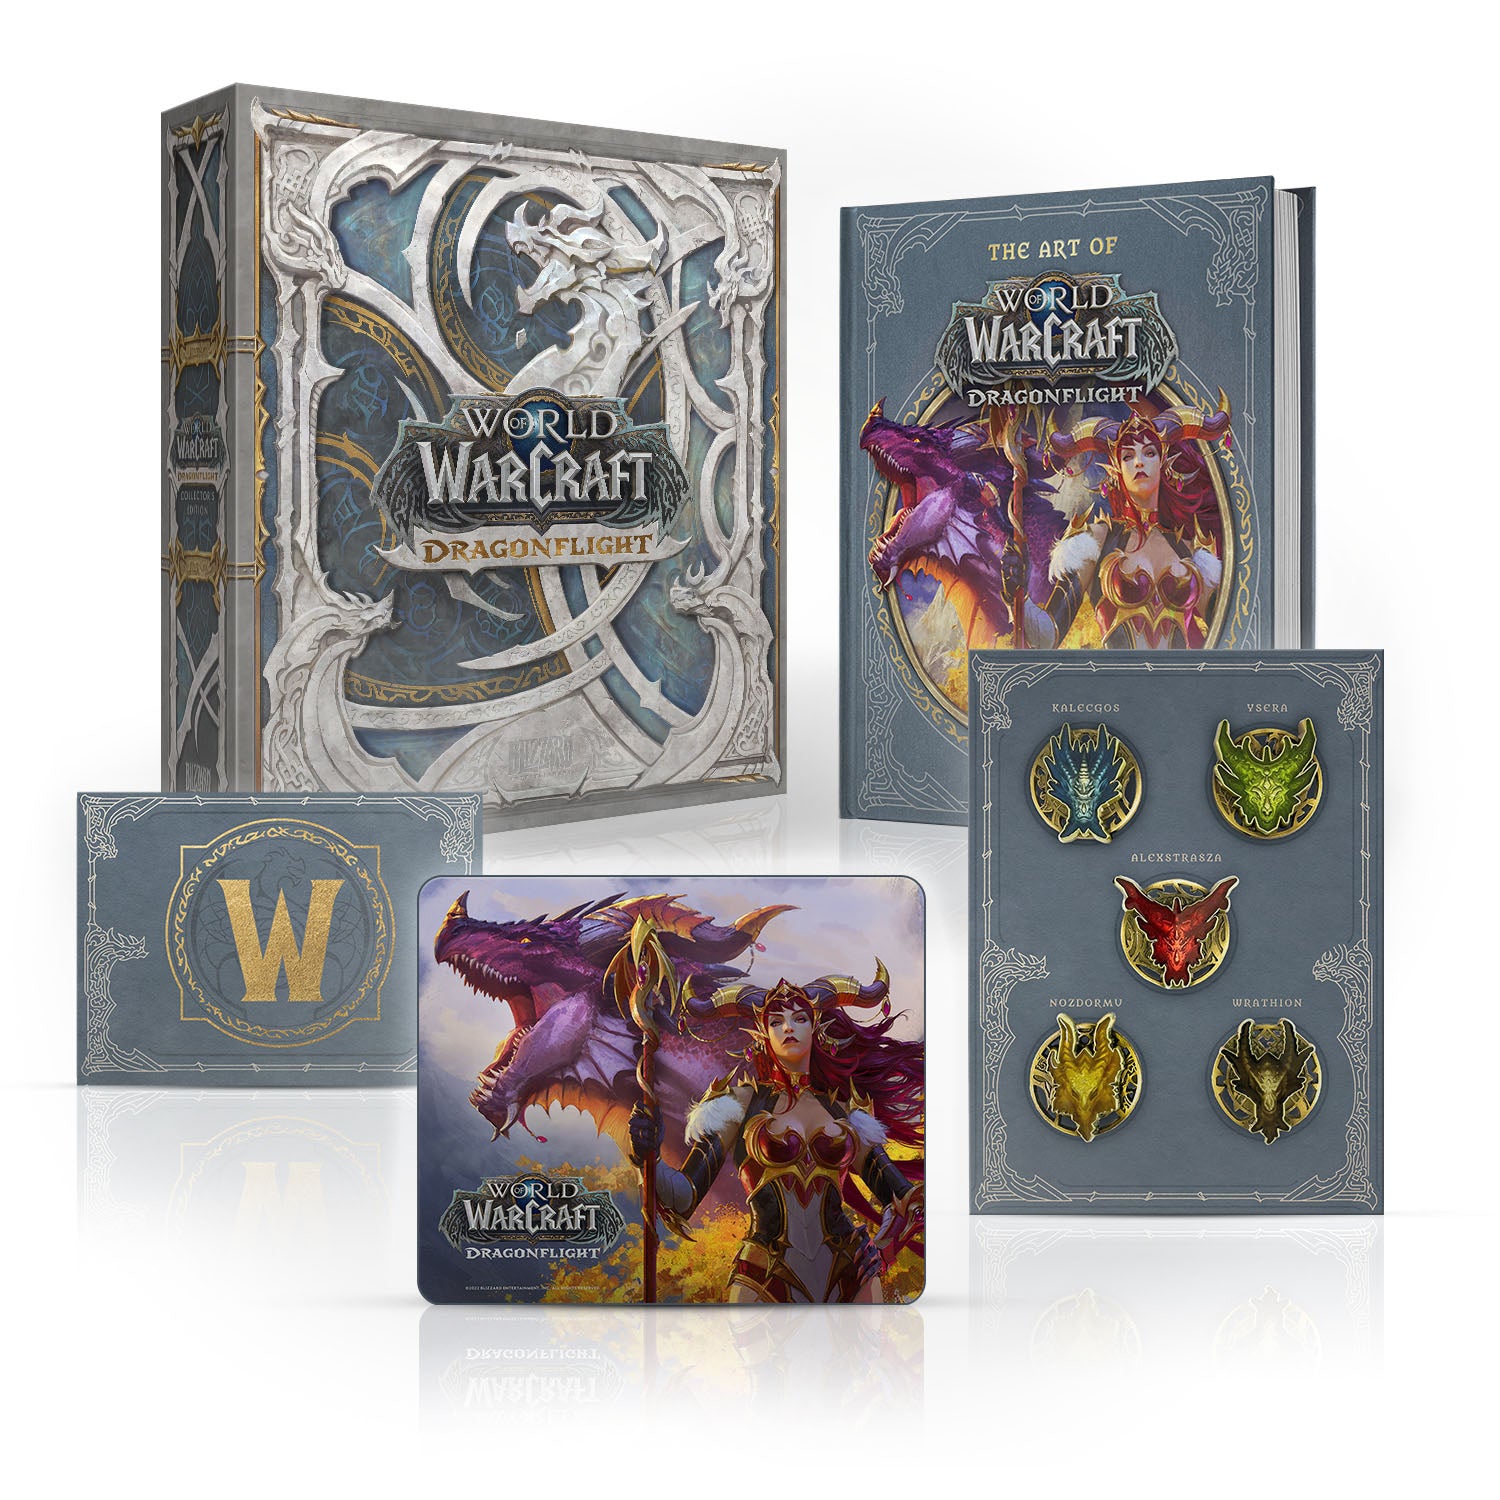 Dragonflight Epic Edition Collector's Set - German - Box View